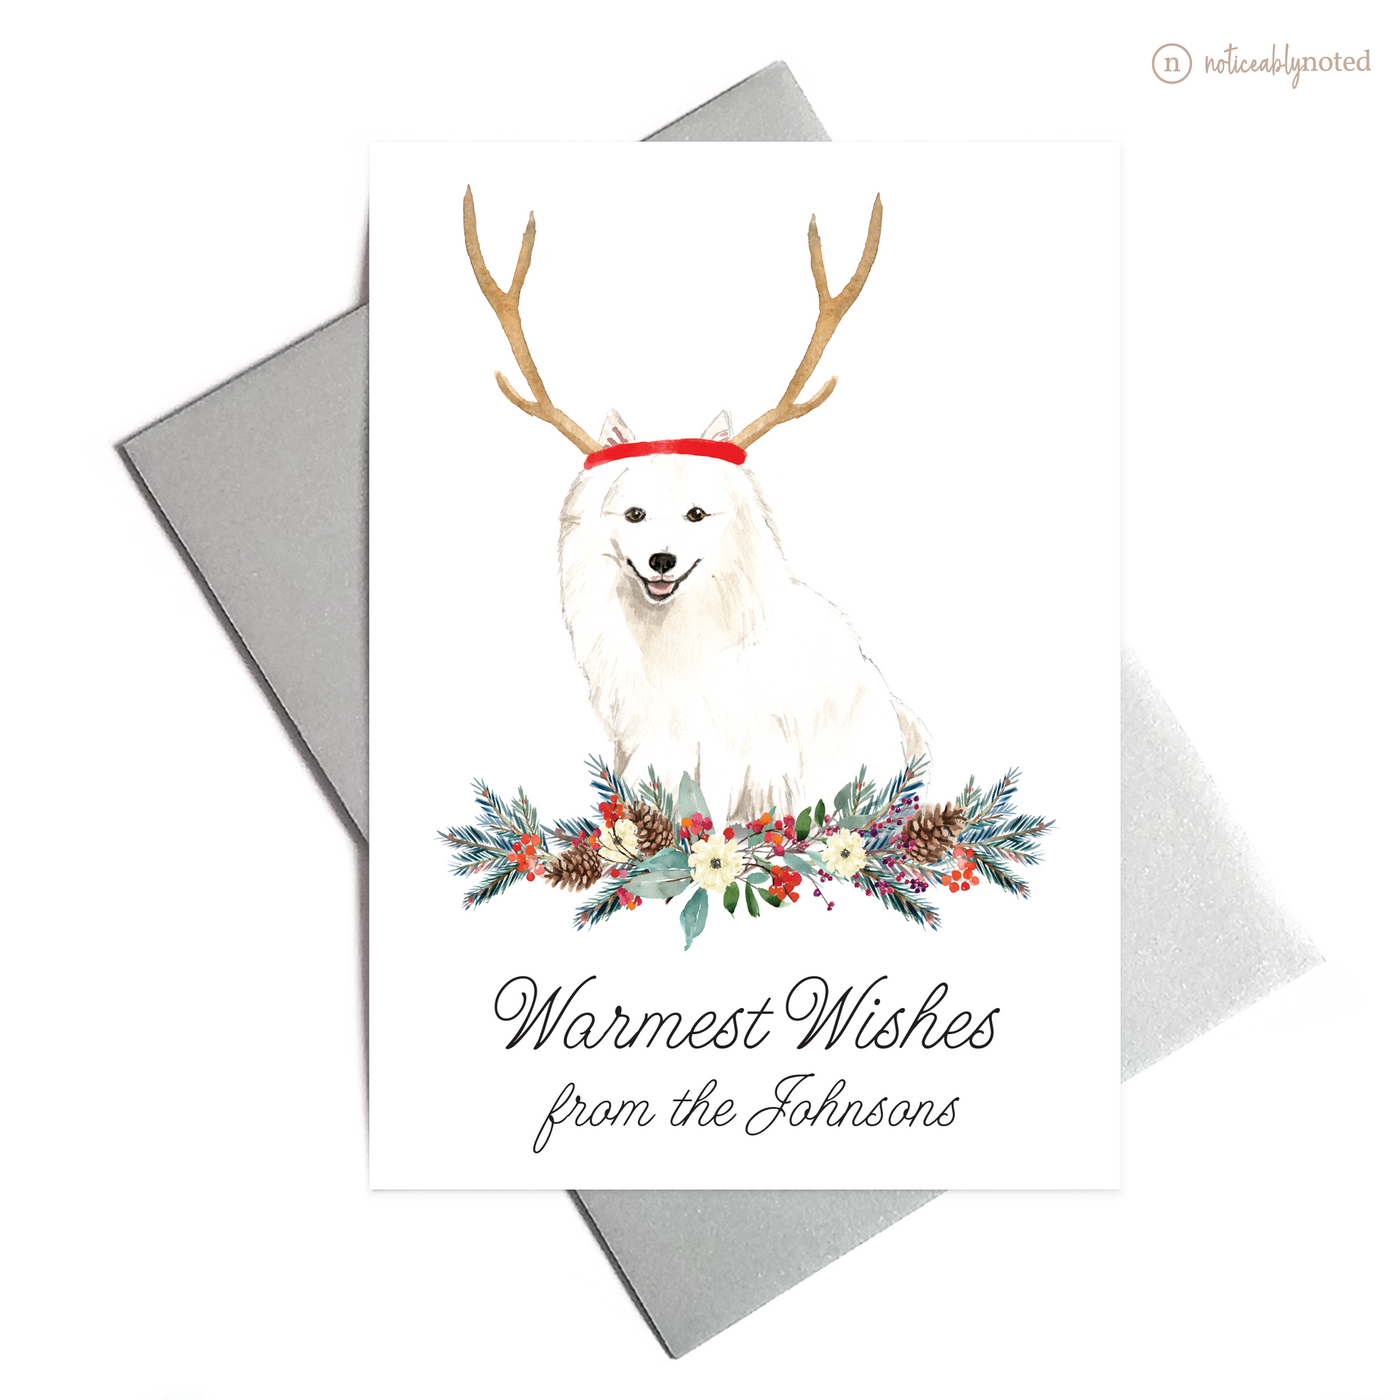 Japanese Spitz Dog Holiday Greeting Cards | Noticeably Noted